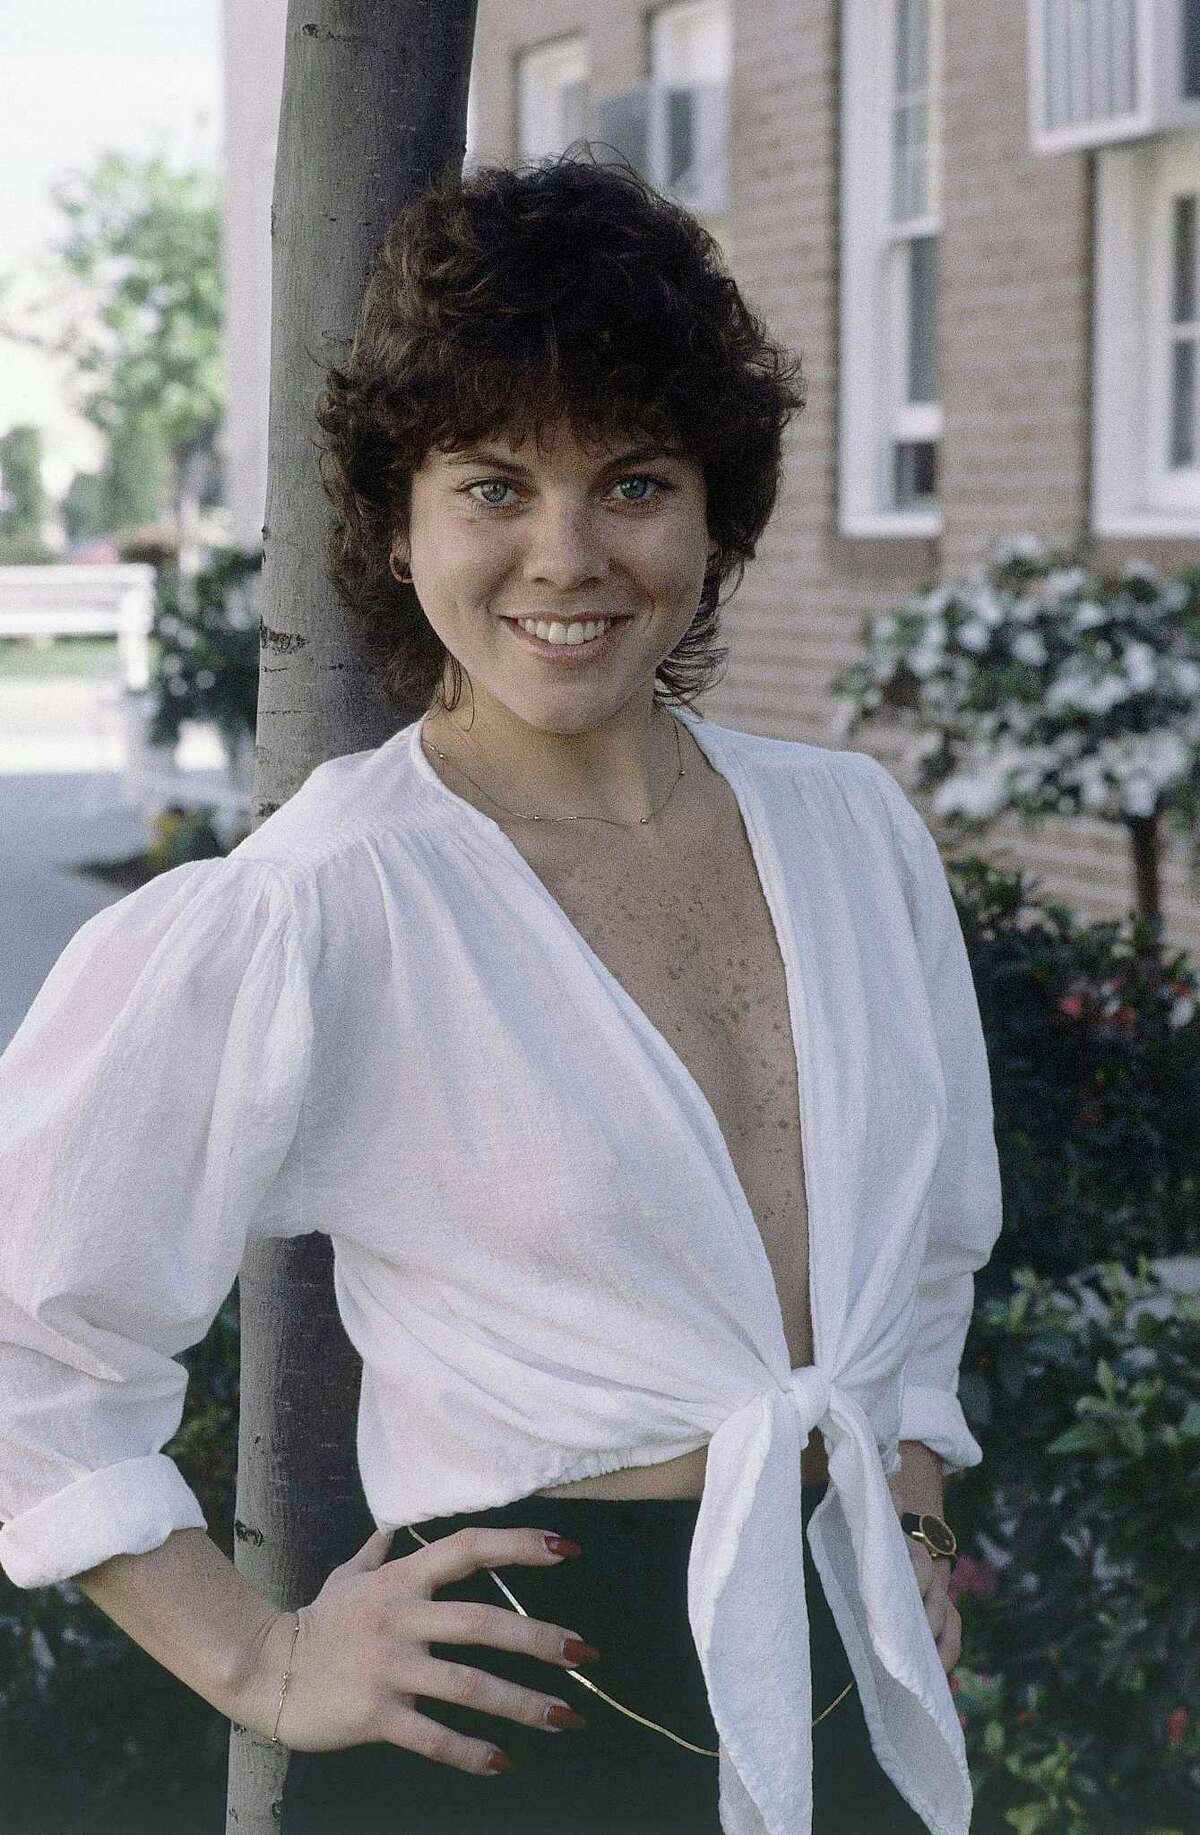 FILE - This Feb. 19, 1982 file photo shows actress Erin Moran of the television show, "Happy Days" in Los Angeles. Moran, the former child star who played Joanie Cunningham in the sitcoms "Happy Days" and "Joanie Loves Chachi," has died at age 56. Police in Harrison County, Indiana said that she had been found unresponsive Saturday, April 22, 2017, after authorities received a 911 call. (AP Photo/Wally Fong, File)